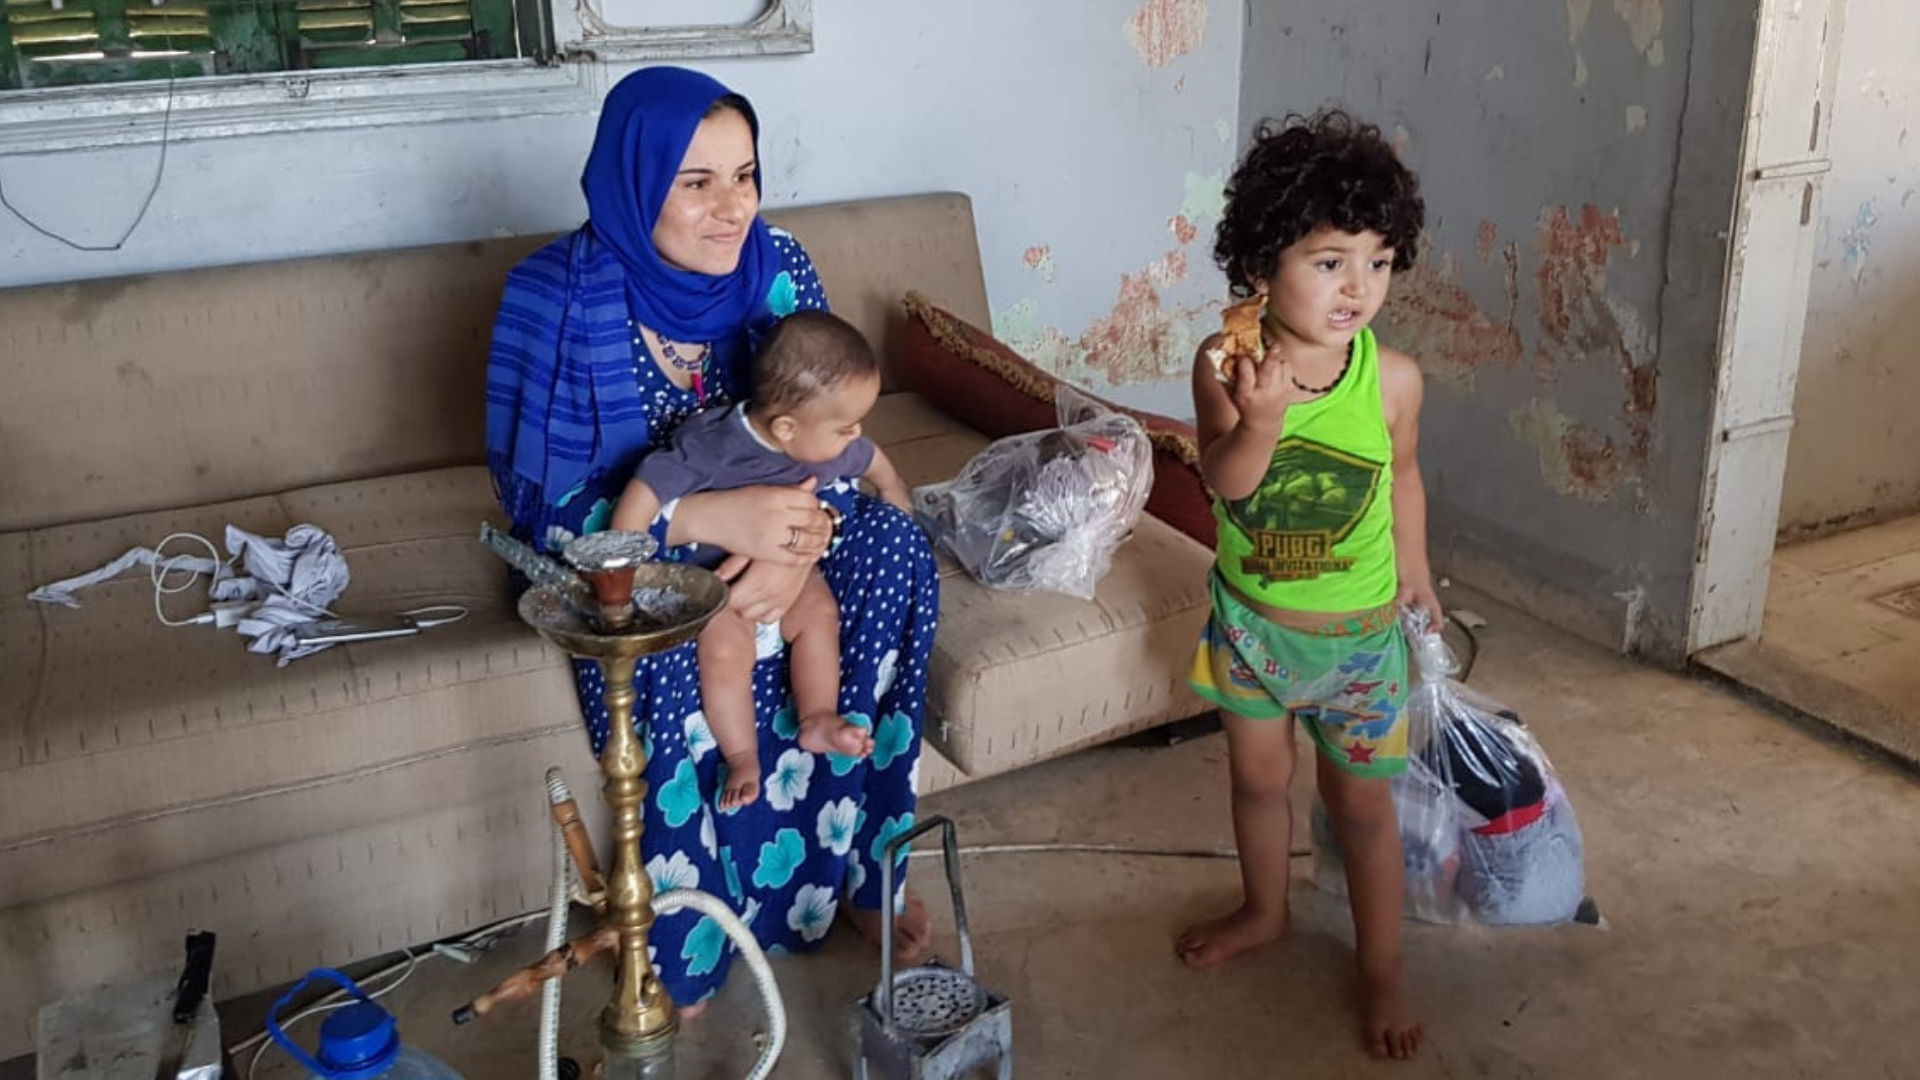 On August 4, 2020 an explosion near the Port of Beirut claimed hundreds of lives, wounded thousands, and left 300,000 instantly homeless. Naturally, people flocked to the United Nations in Lebanon for help, and that’s exactly where one single refugee mother who had lost everything went. Unfortunately, the U.N. was unable to help mom and her family, and it seemed like all hope was lost.   The family’s story reached our local church partner, Pastor Mohammad Yamout with Tyre Church. After meeting the mom, Mohammad offered to bring her and her family to Tyre. Mom and her kids now live in an apartment owned by GO MENA and Tyre Church that is used for emergency refugee housing.   Mom attends services at Tyre multiple times a week and even works part-time. Her family has food, shelter, and her kids are getting an education. Her story is one of incredible resilience and God’s great ability to provide. Families continue to be referred to Tyre Church that the U.N. is unable to help. 